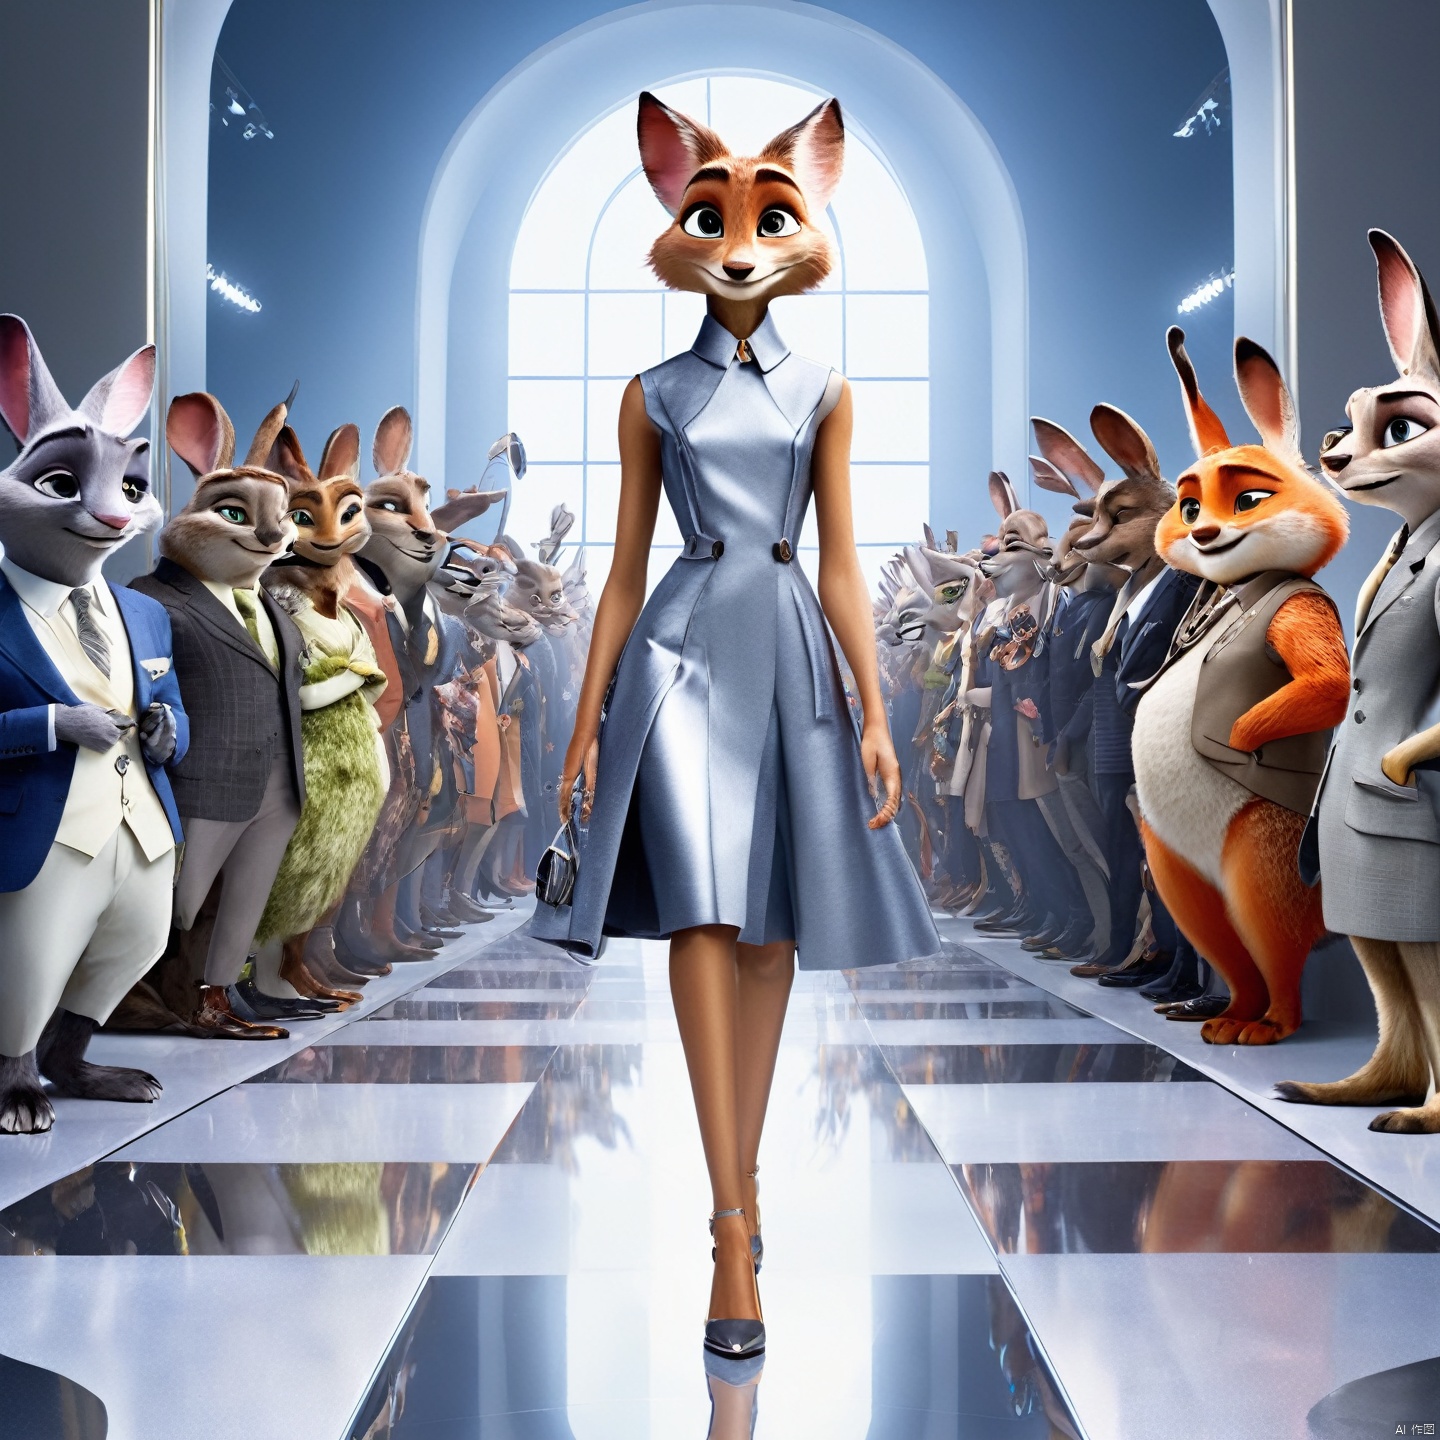 Zootopia,Humanized animals, dressed in Dior runway fashion and shoes, milan fashion week, Movie poster style, fox and rabbit, characters and style of Zootopia,Dynamic capture of runway shows,high-end design style,Pure gray mirrored texture flooring,16K , gmlm